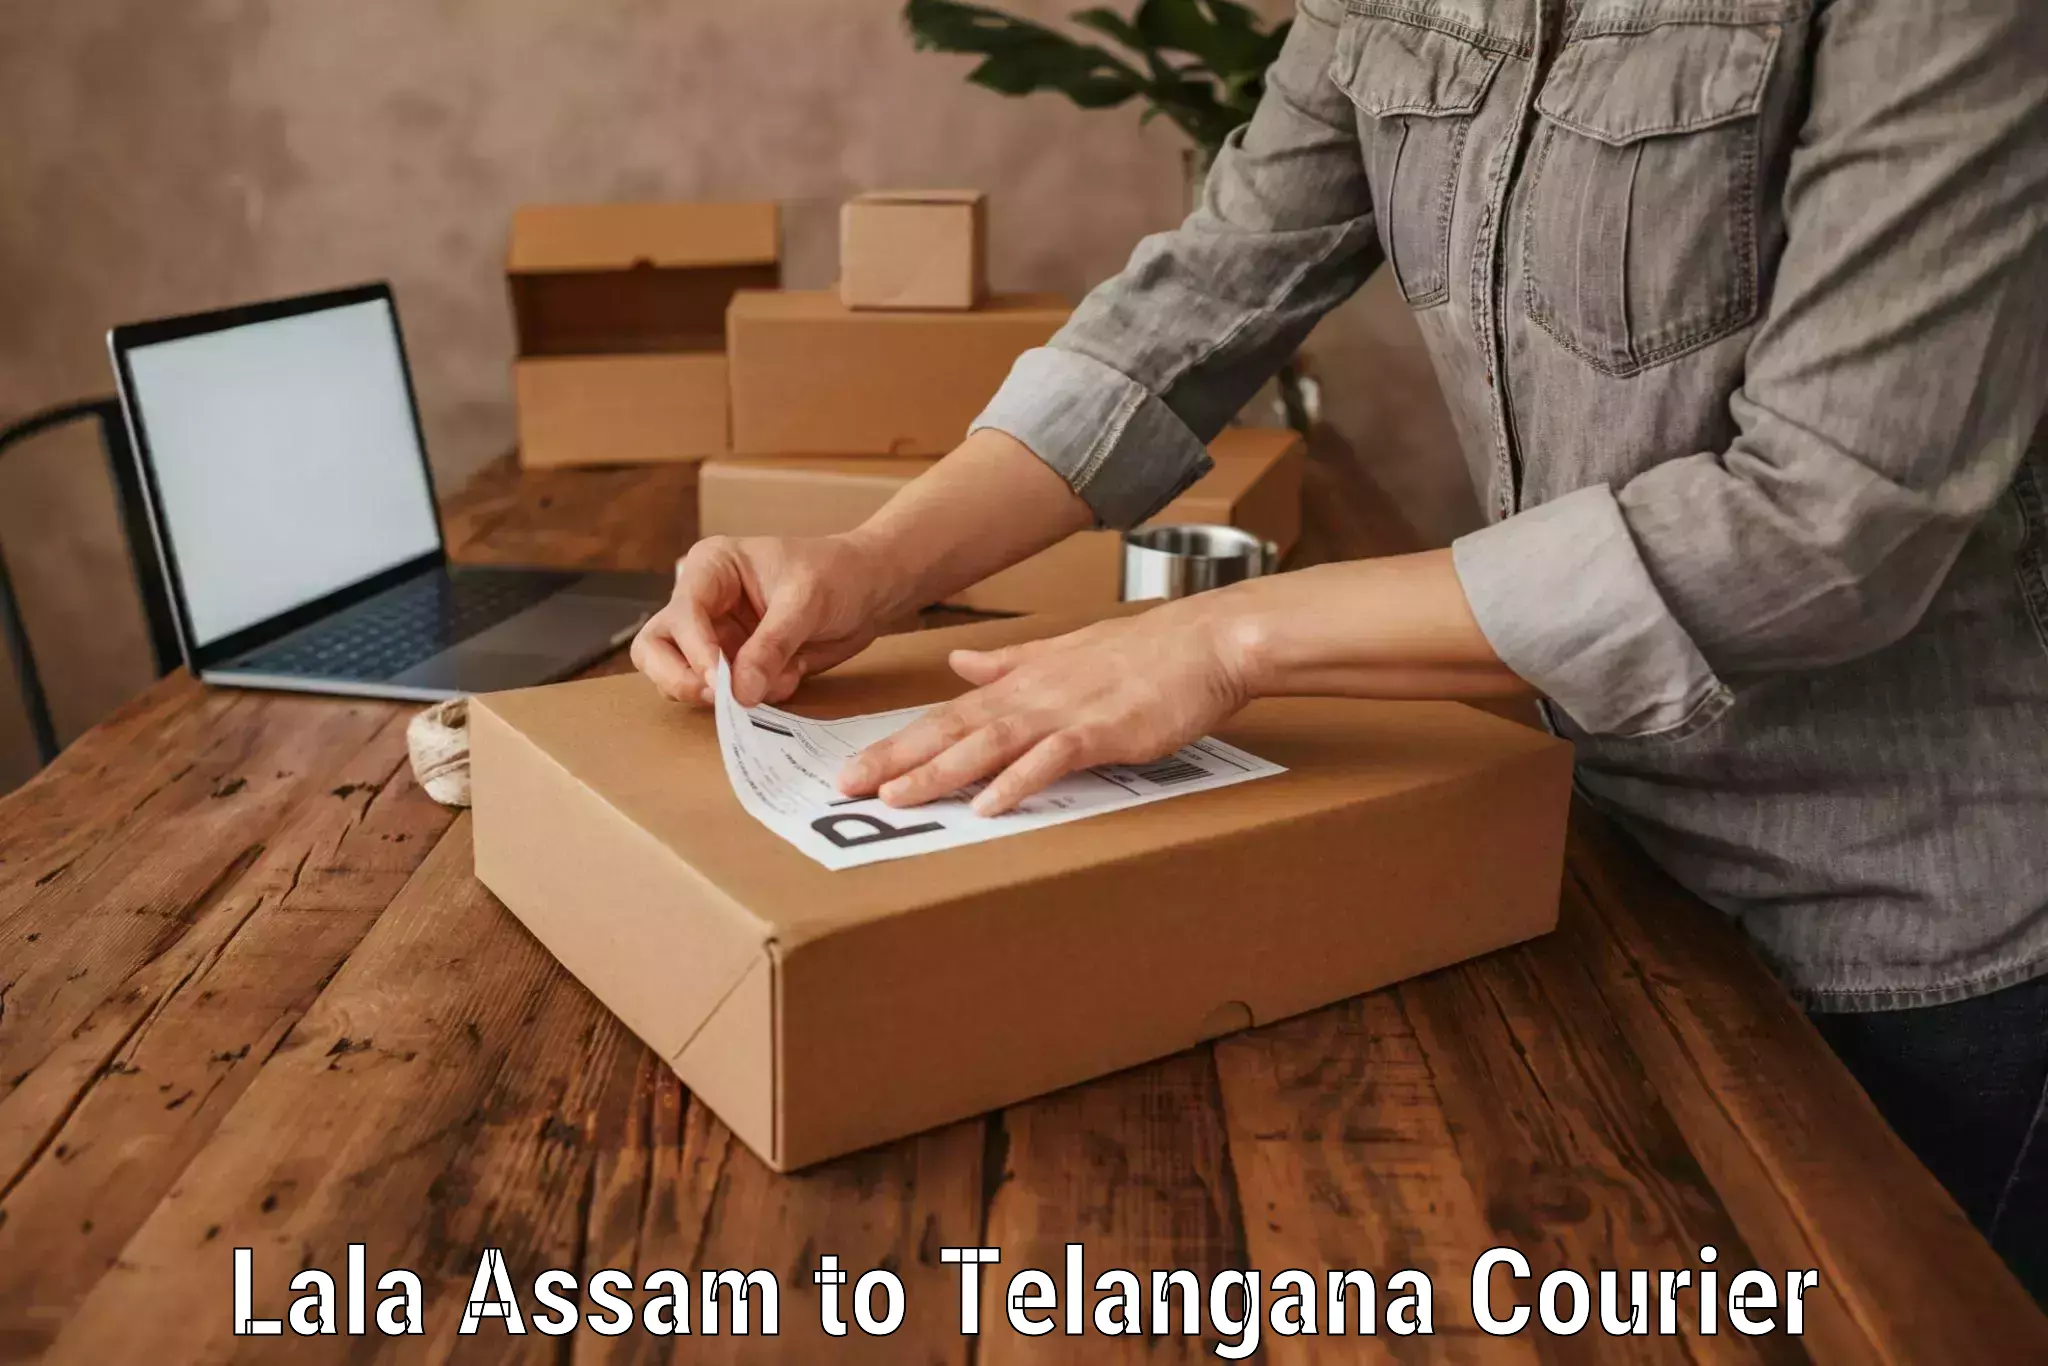 Luggage delivery app Lala Assam to Mulugu